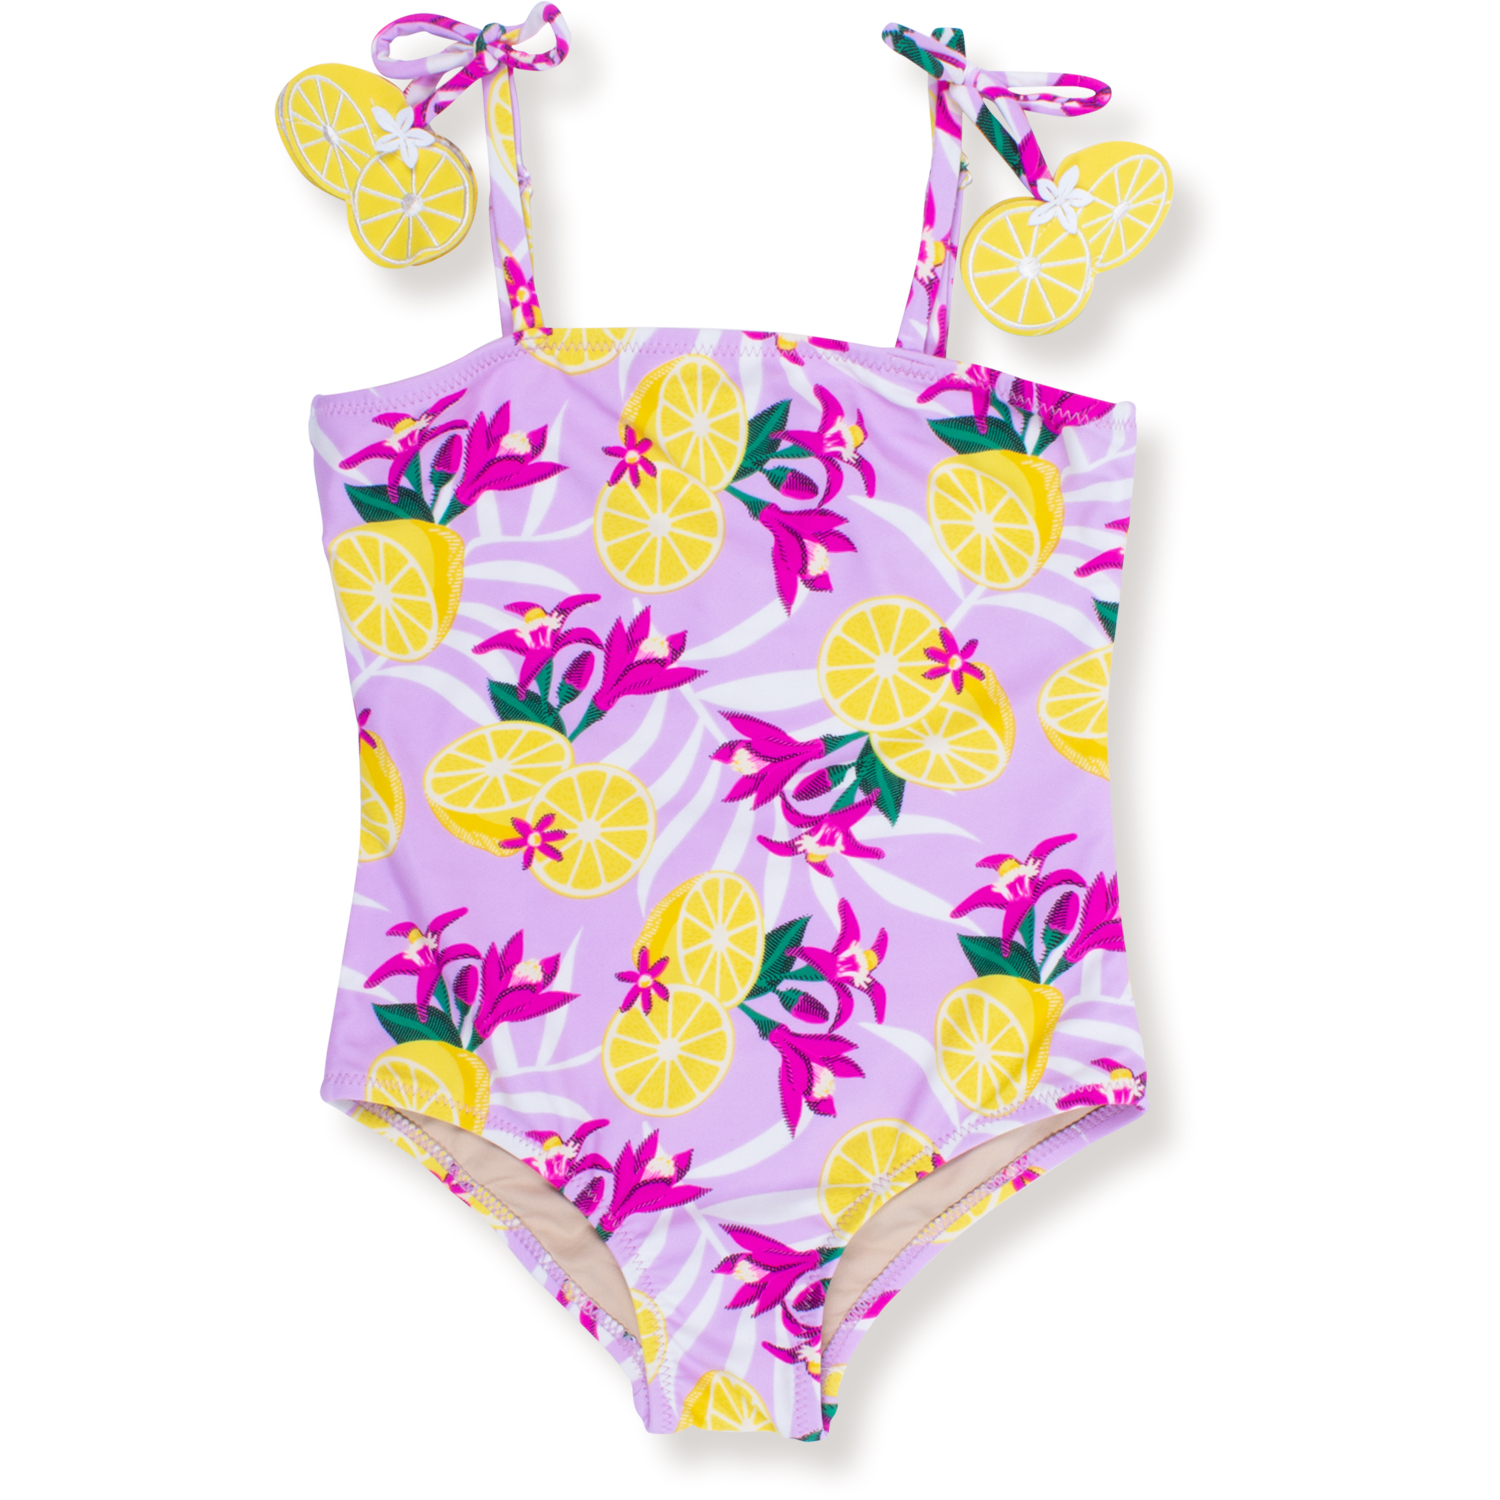 Tropicana Pineapple Full Coverage One-Piece Swimsuits - Mommy and Me